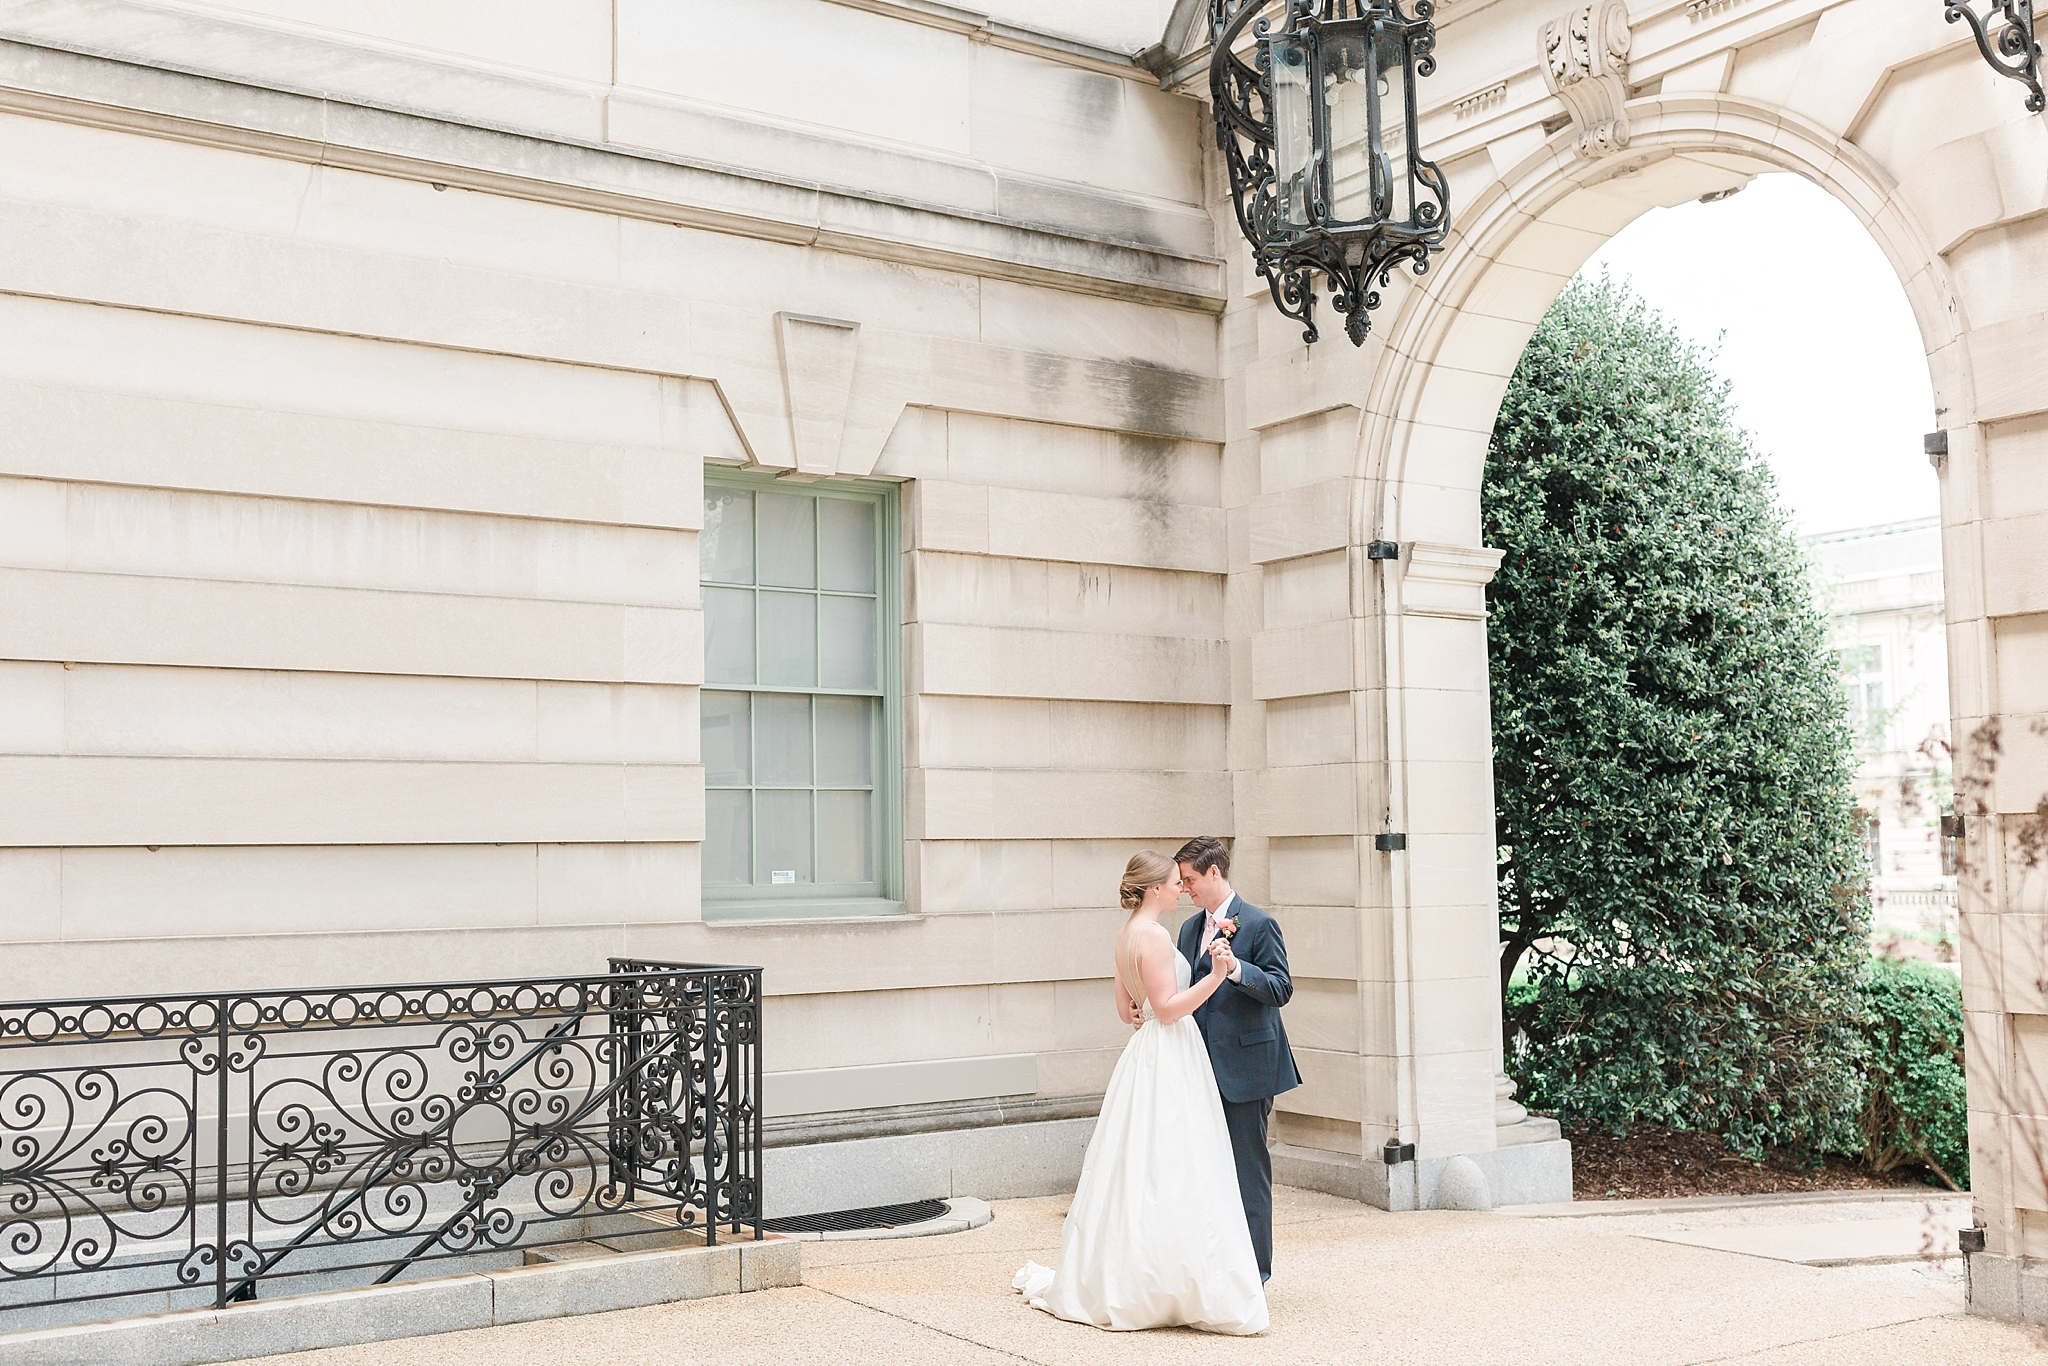 This classic DC wedding is held at the Society of the Cincinnati and Whittemore House in NW Washington, DC with a refreshing spring color palette of blush, peach, and navy blue.